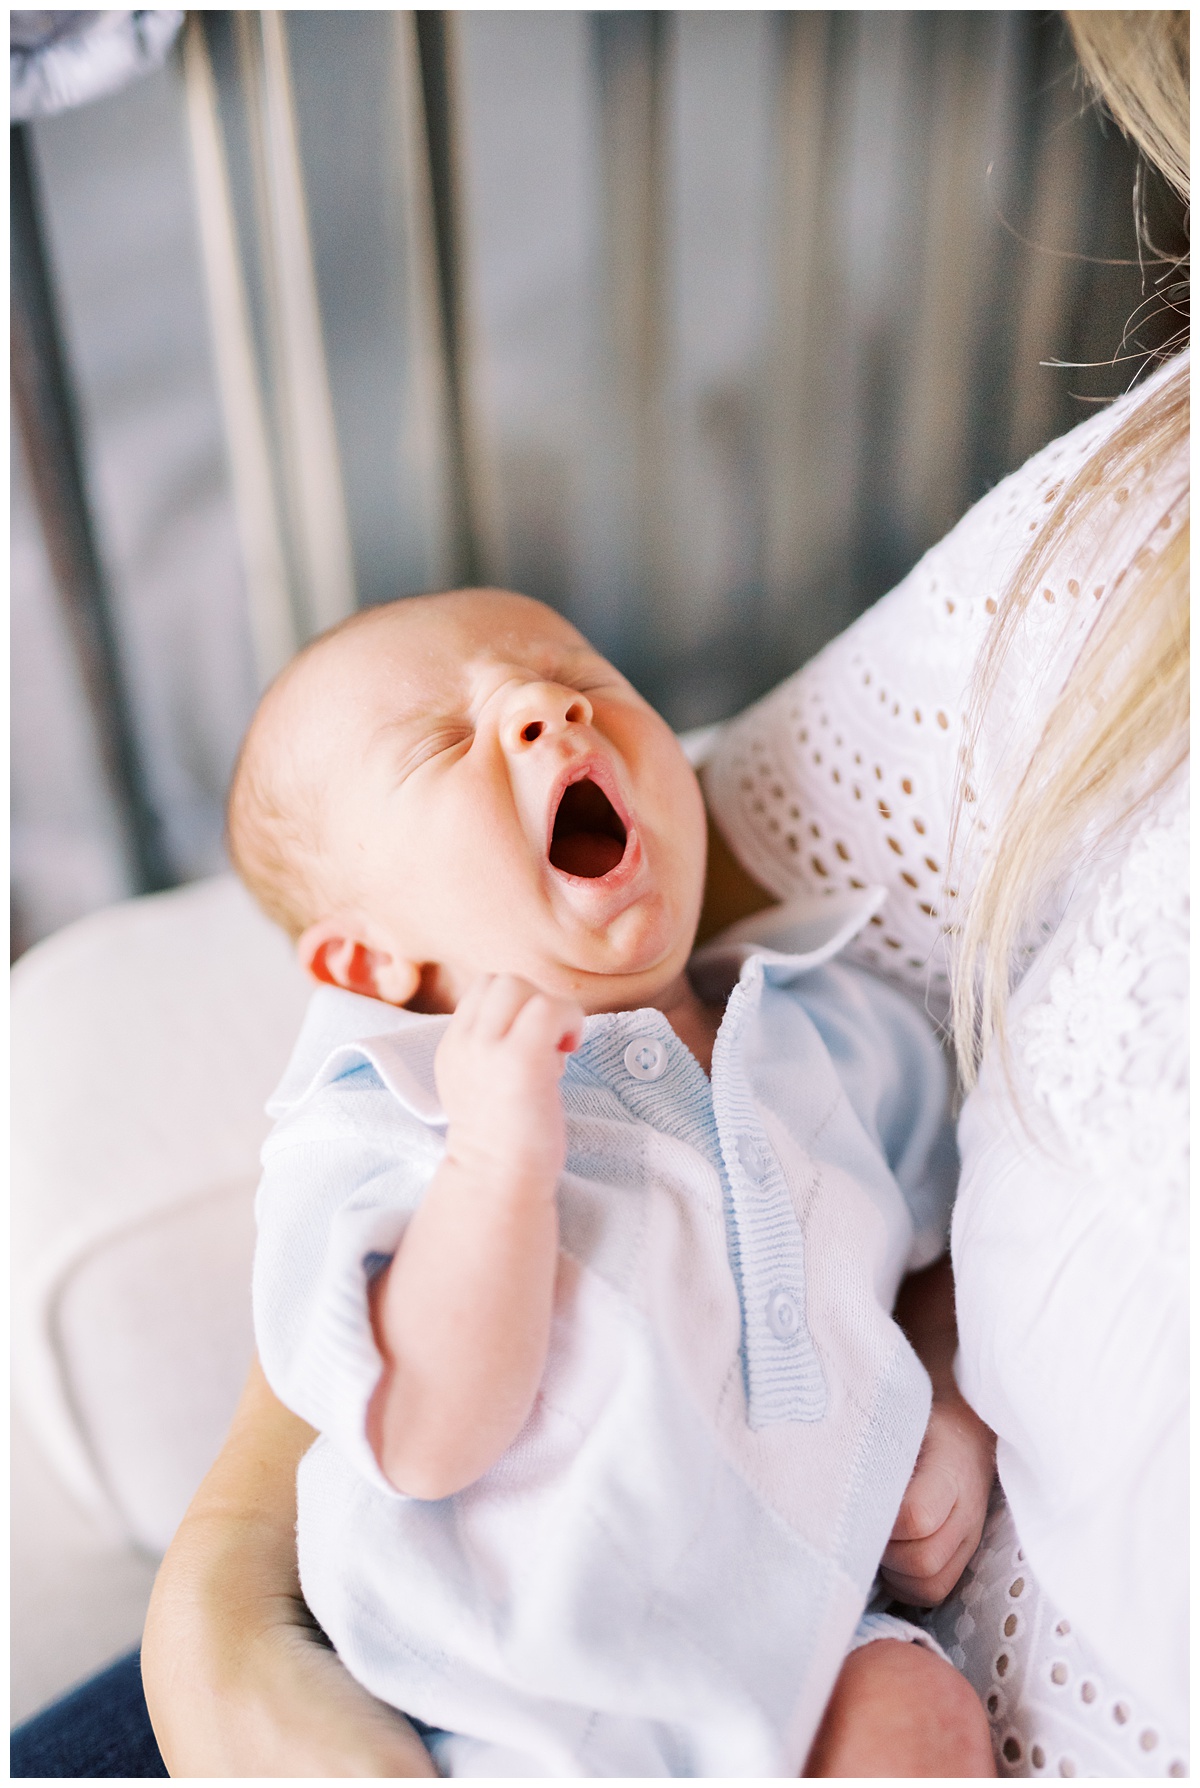 yawning newborn in its mother's arms